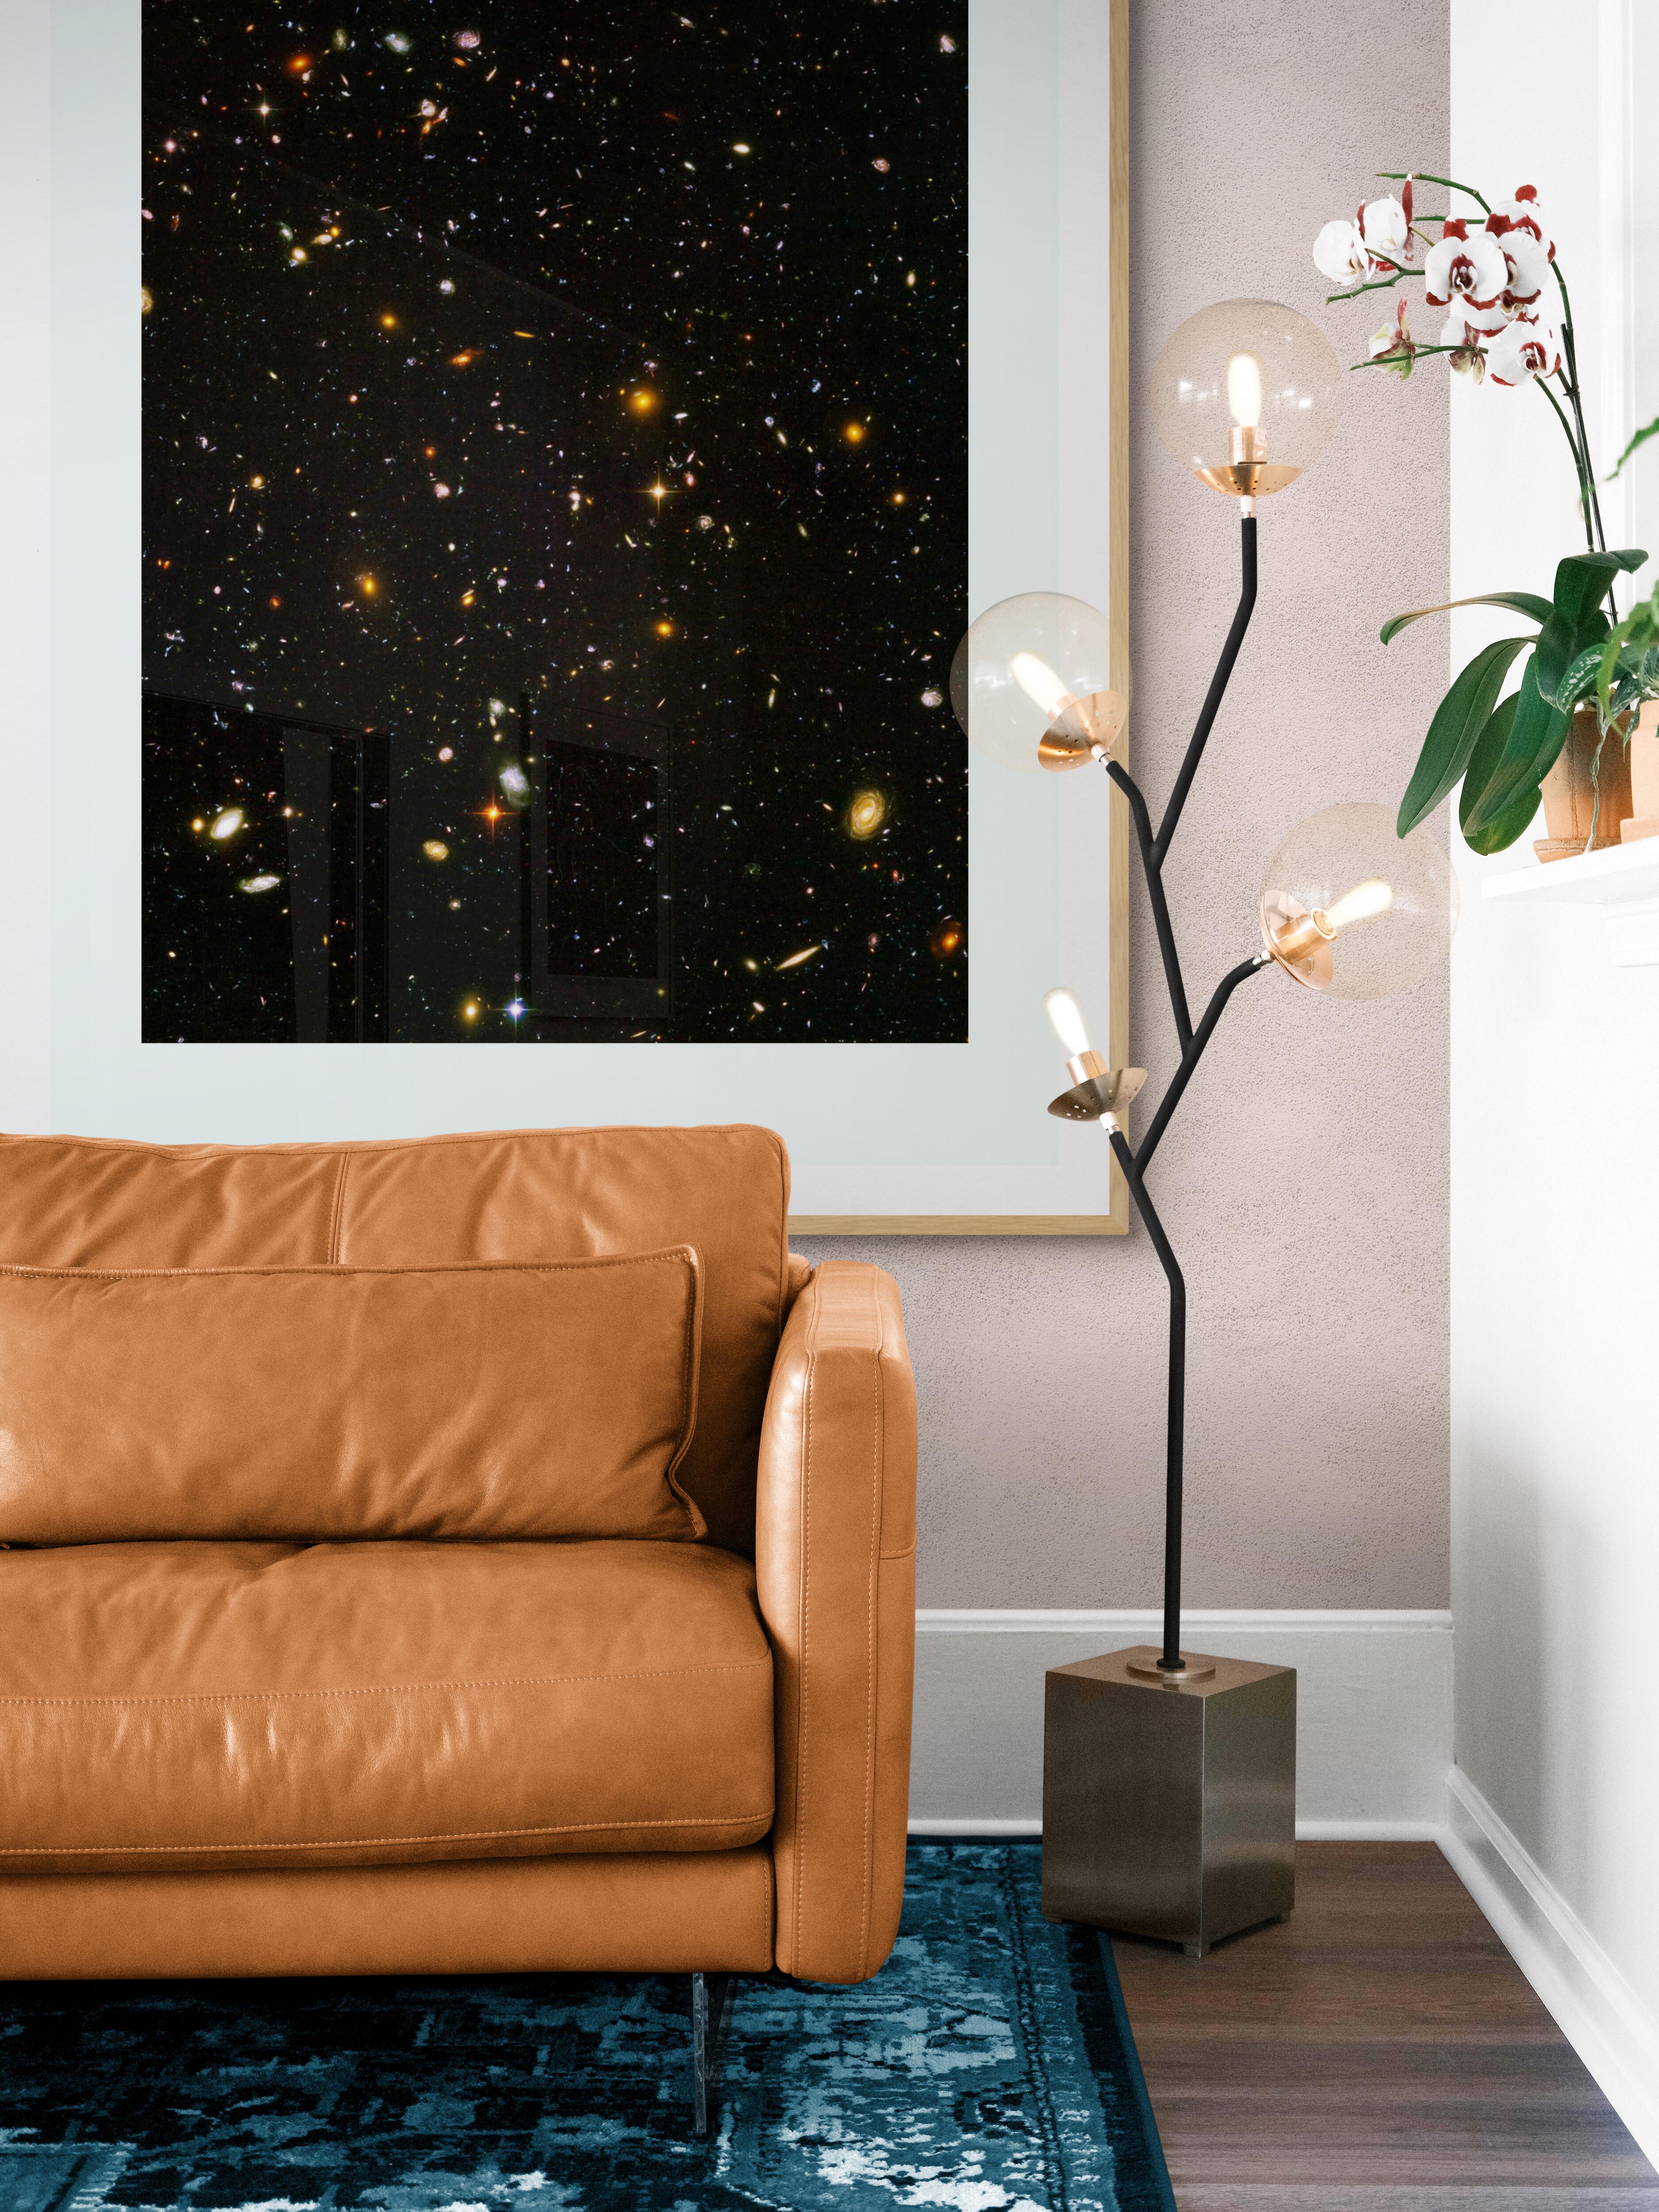 36x24 Original museum grade exhibition prints on acid-free poster paper.
This image can be hung horizontal or verticle.

Embedded in this Hubble Space Telescope image of nearby and distant galaxies are 18 young galaxies or galactic building blocks,